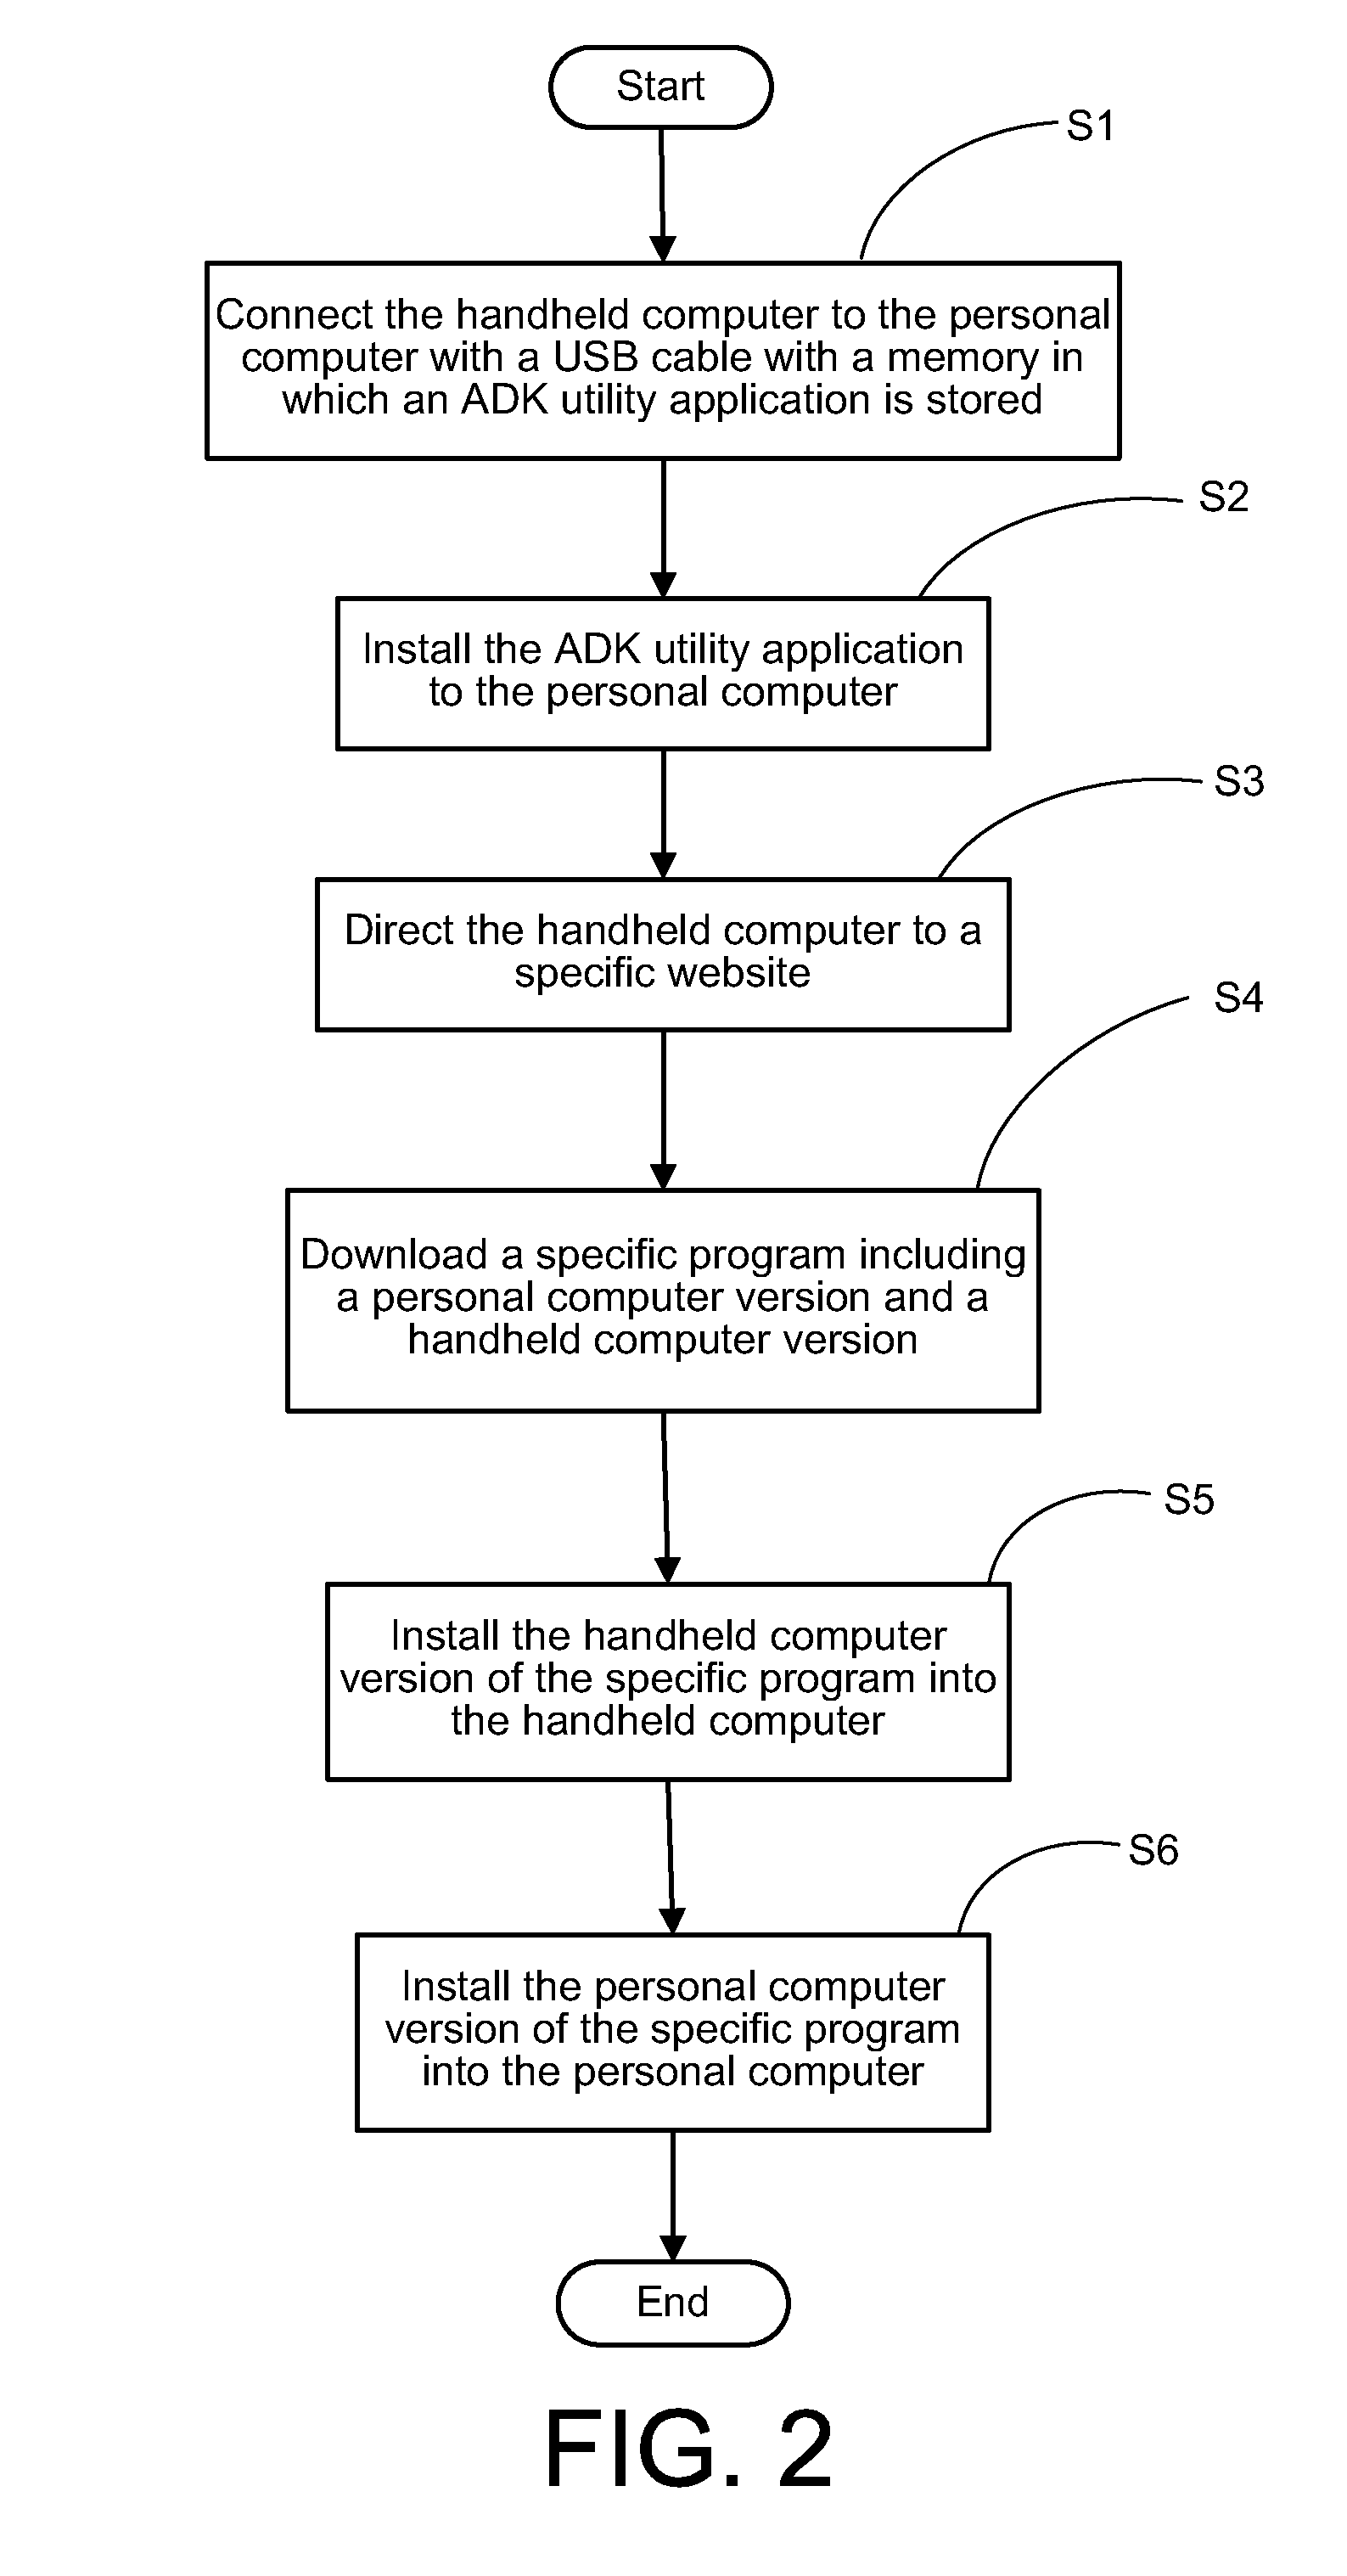 Method for showing an instant notice on a display of computer according to an incoming event of a mobile device